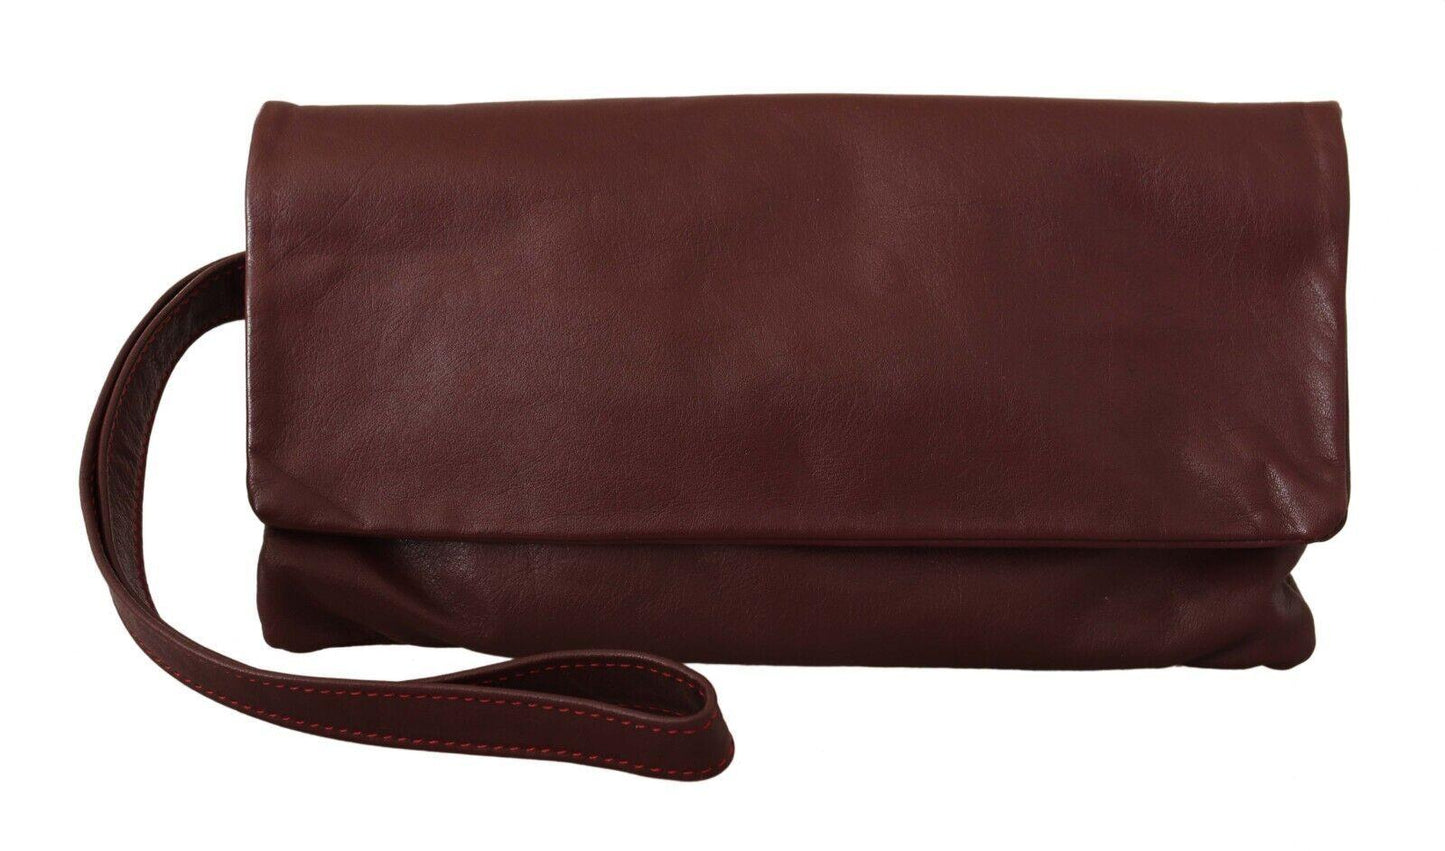 Elegant Brown Leather Clutch with Silver Detailing - PER.FASHION